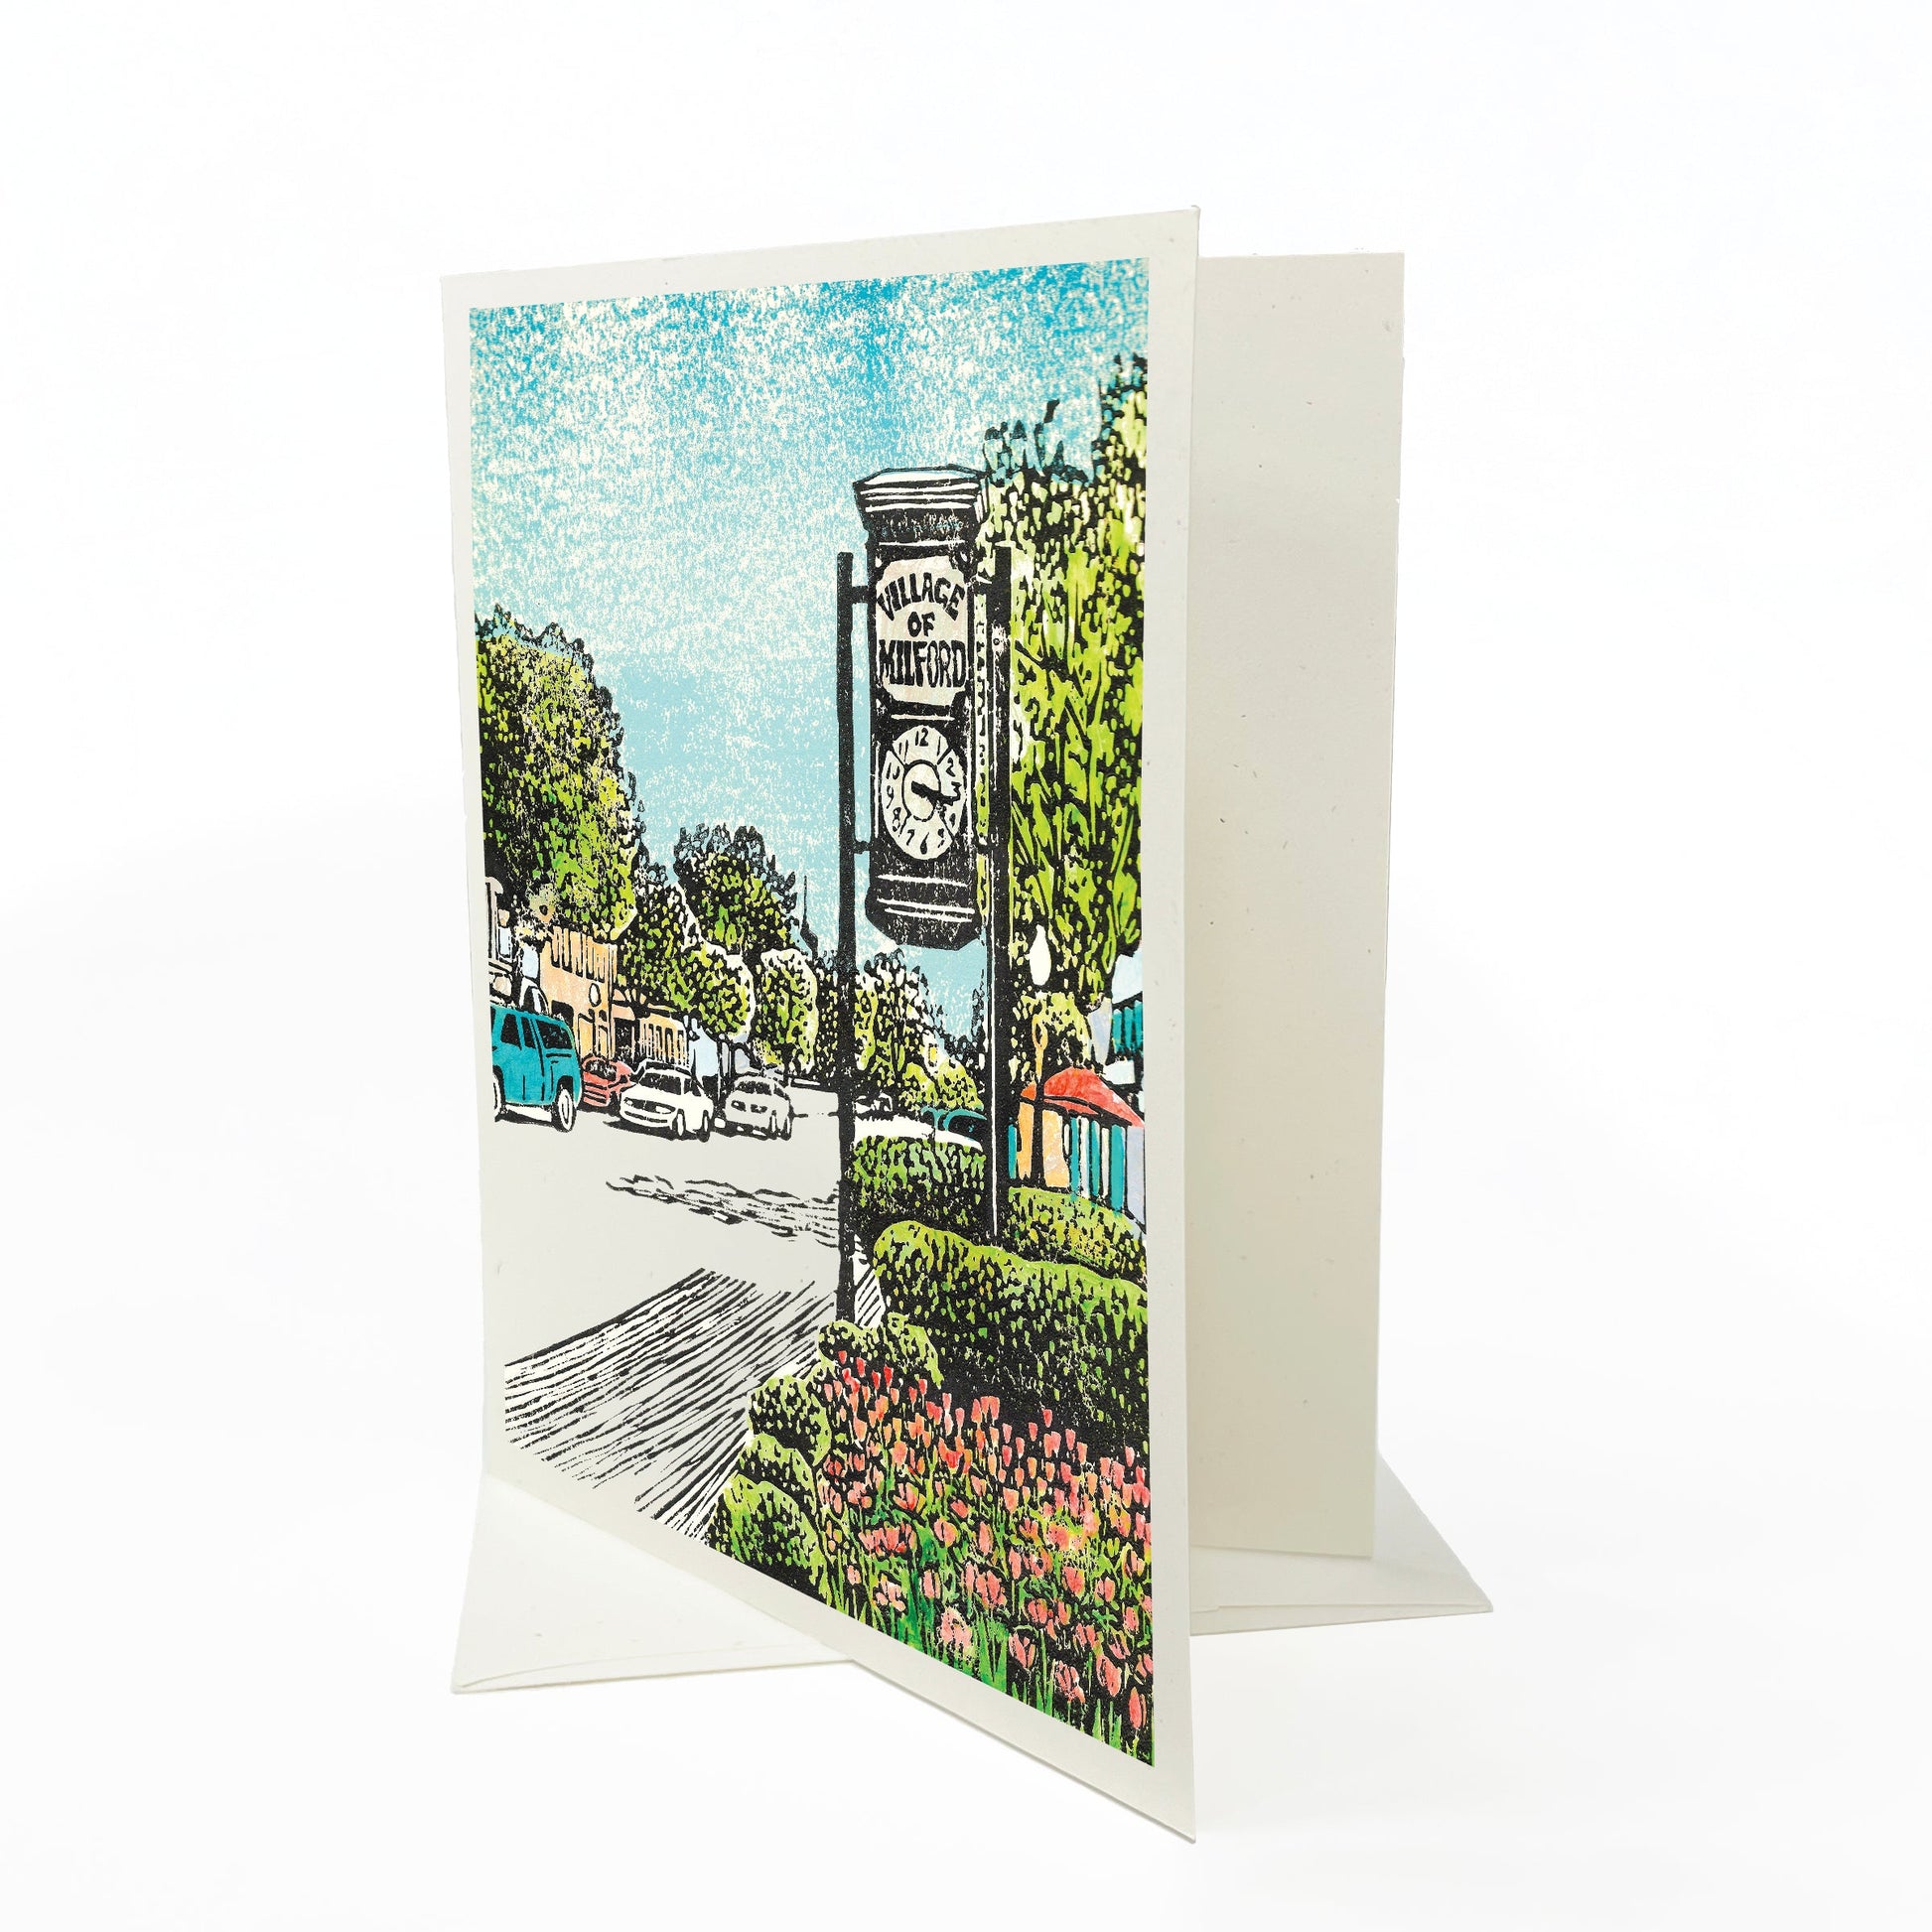 A casually elegant card featuring Milford, Michigan, art by Natalia Wohletz titled Village of Milford.